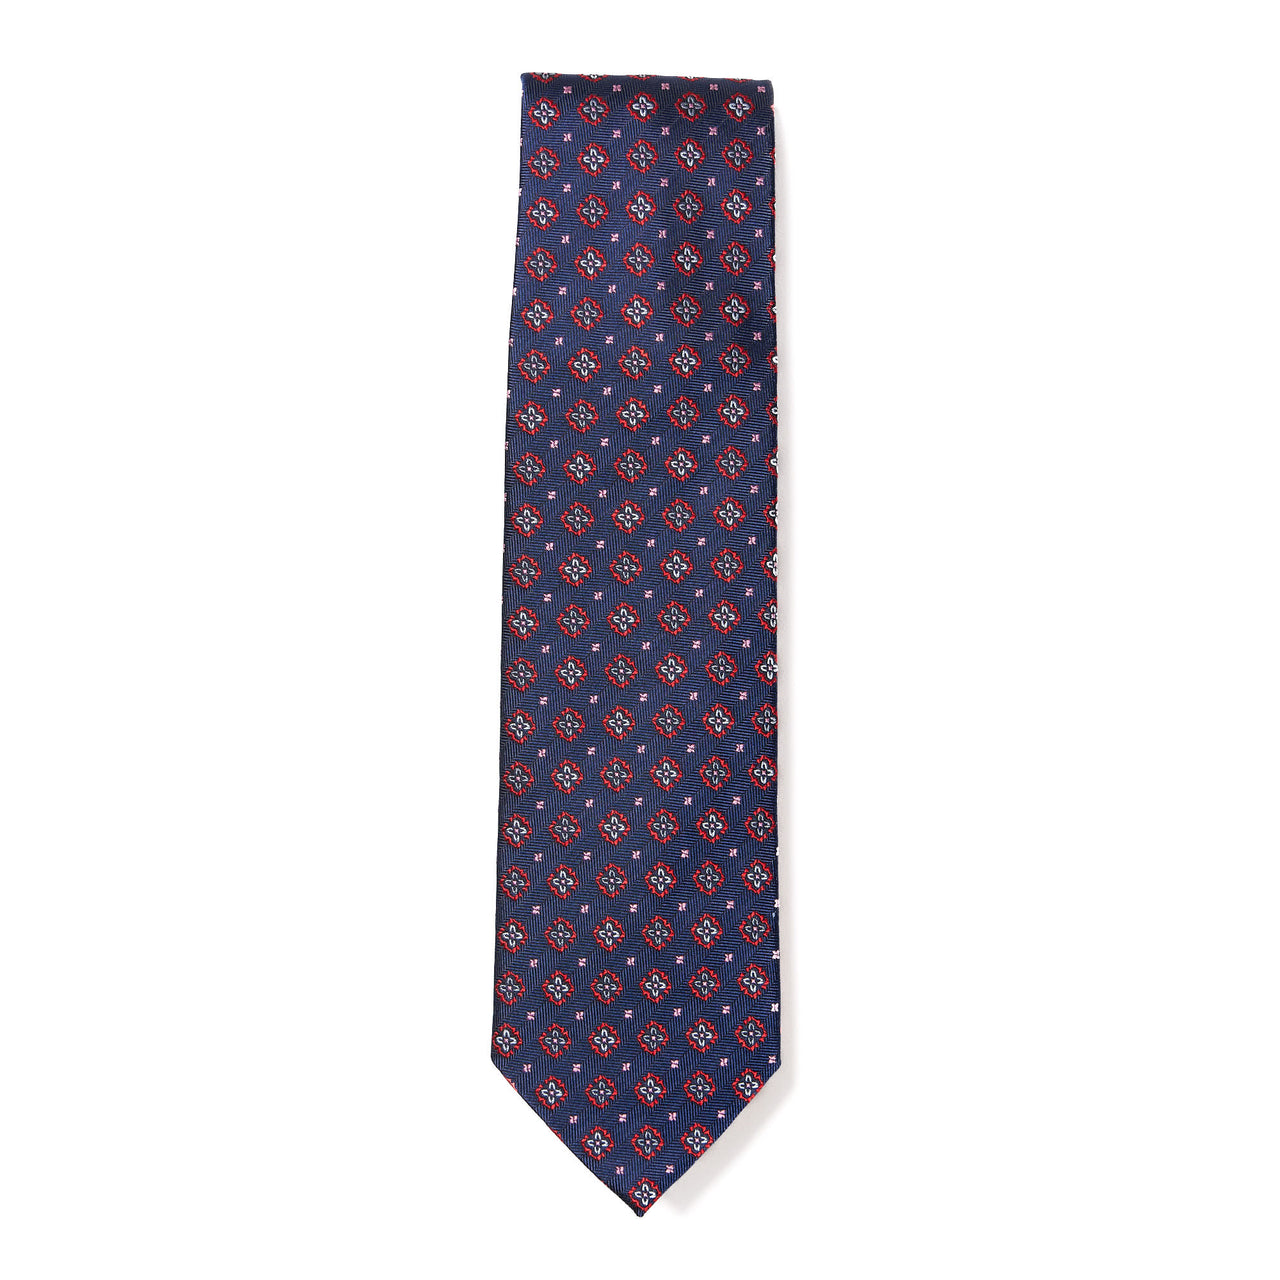 HENRY SARTORIAL X CANTINI Woven Silk Tie NAVY/RED